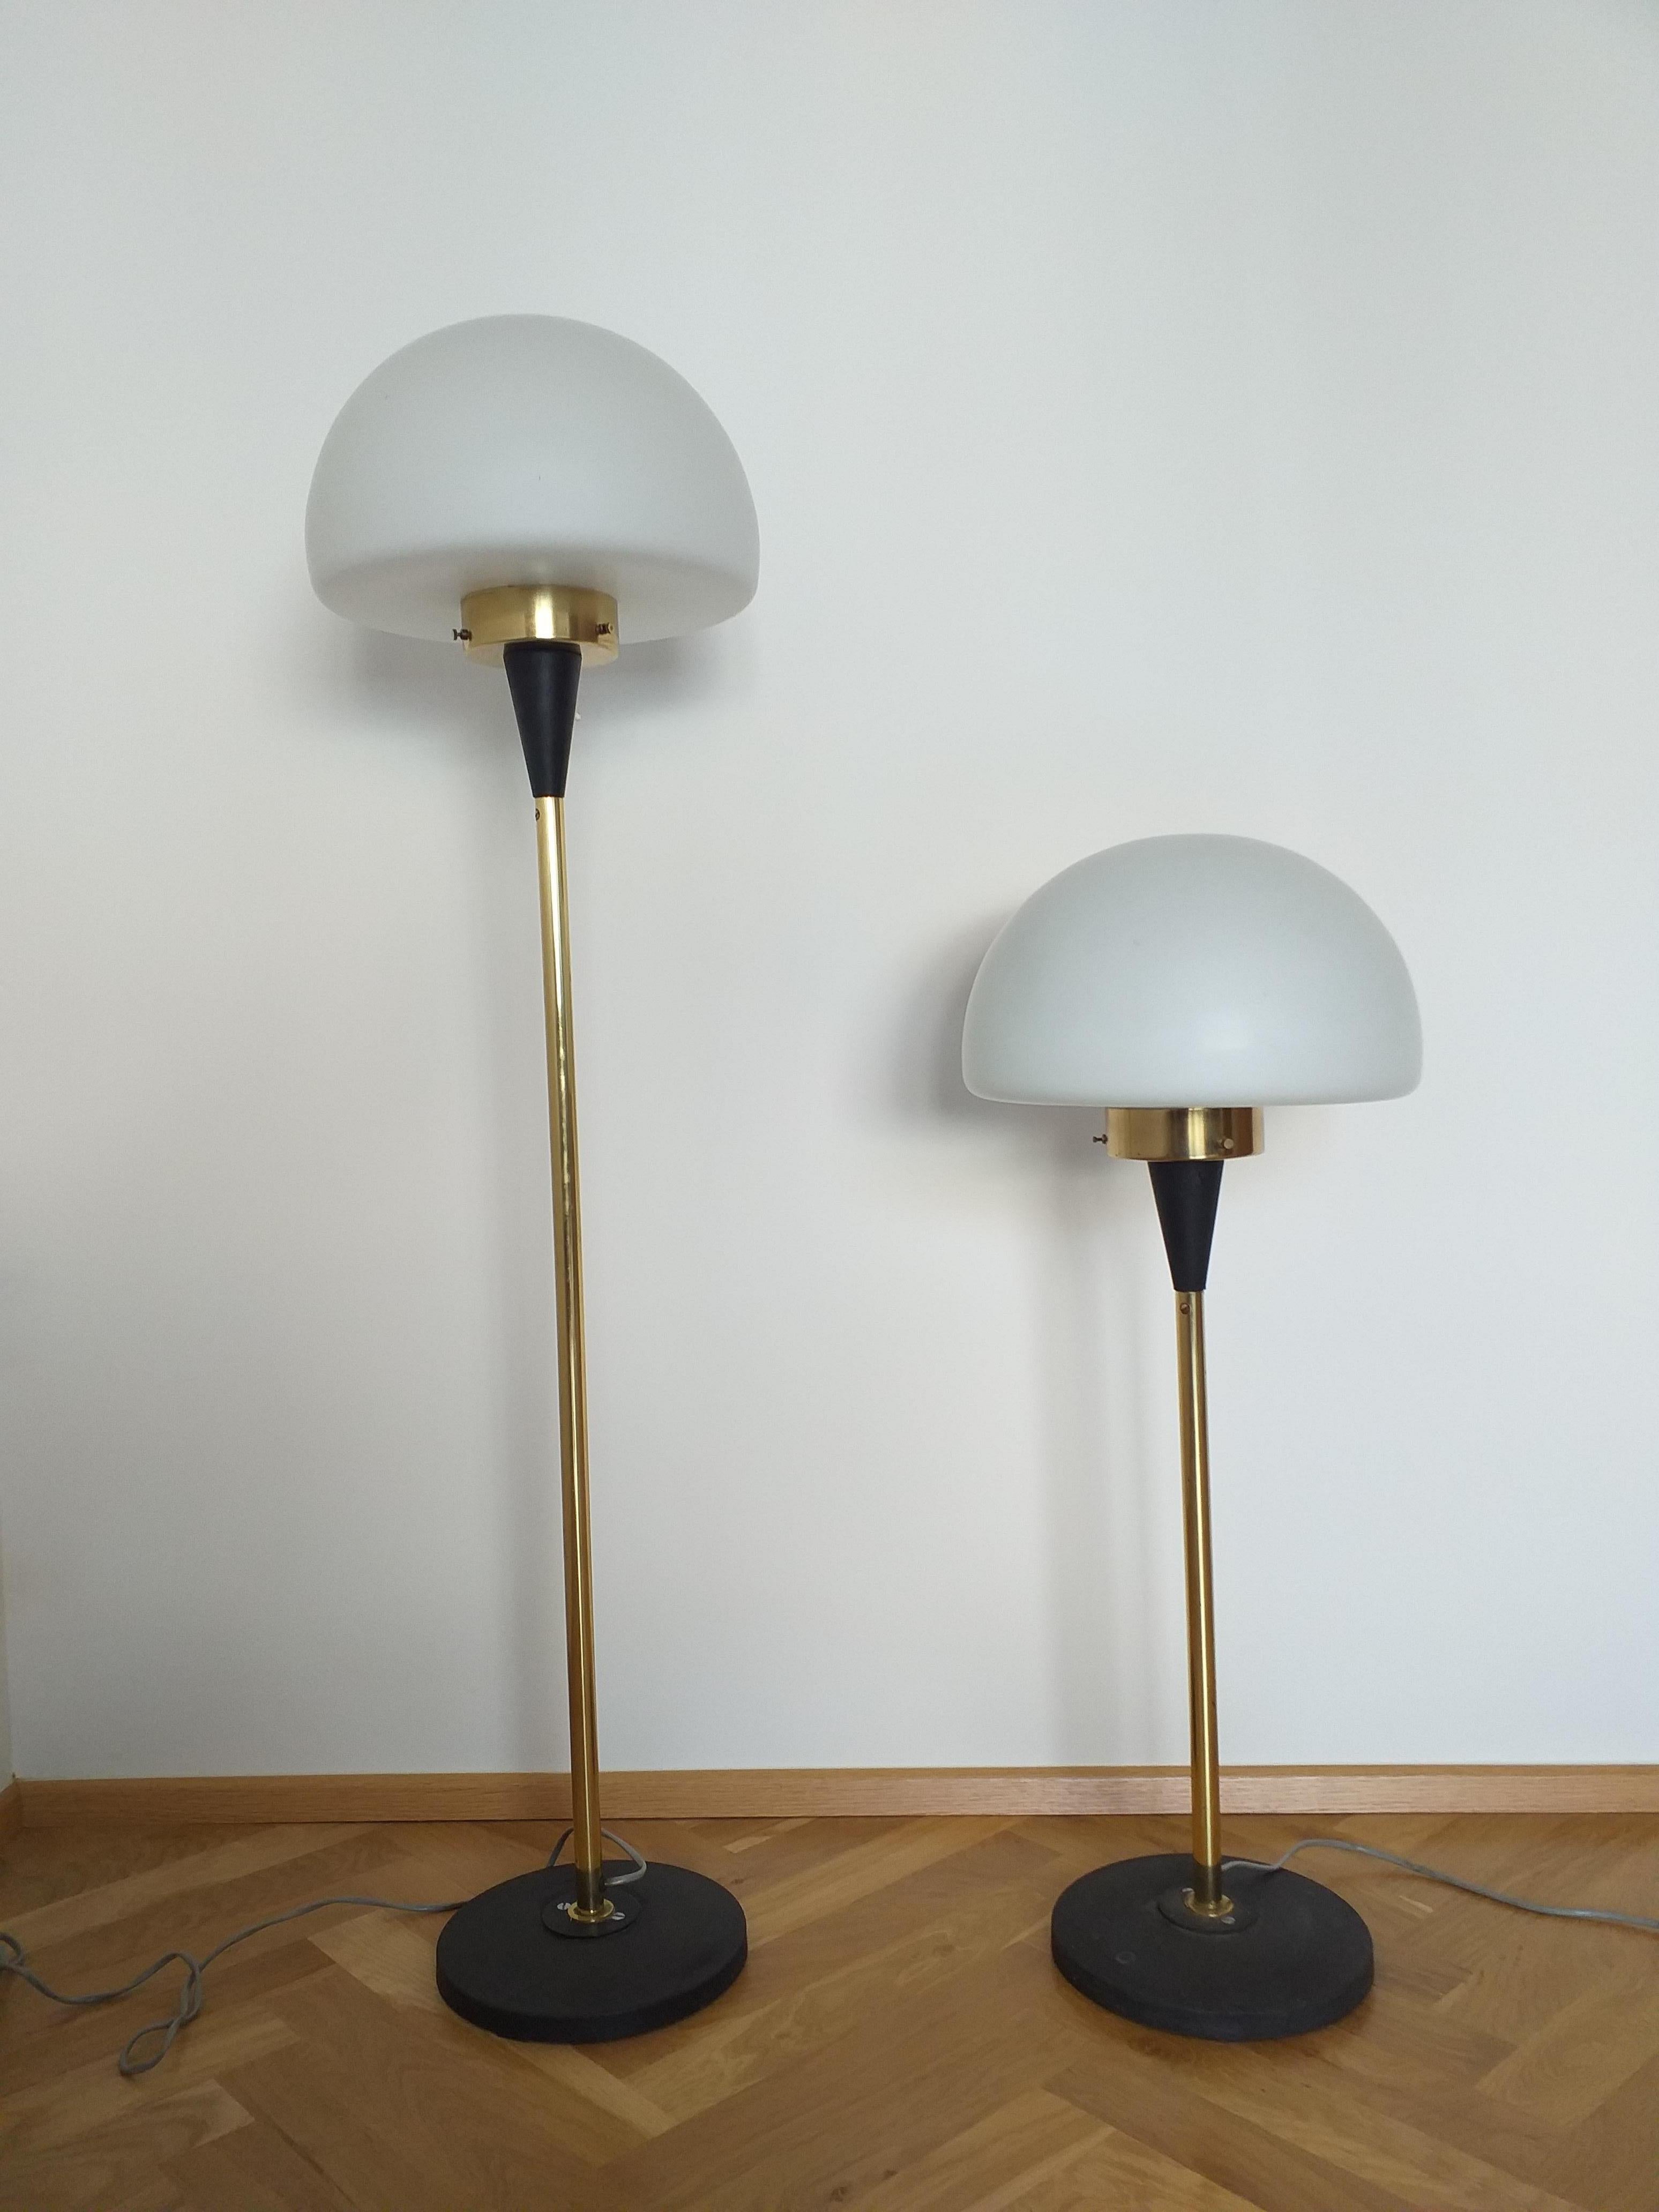 Czech Set of Two Floor Lamps Lidokov Designed by Josef Hurka, 1970s For Sale